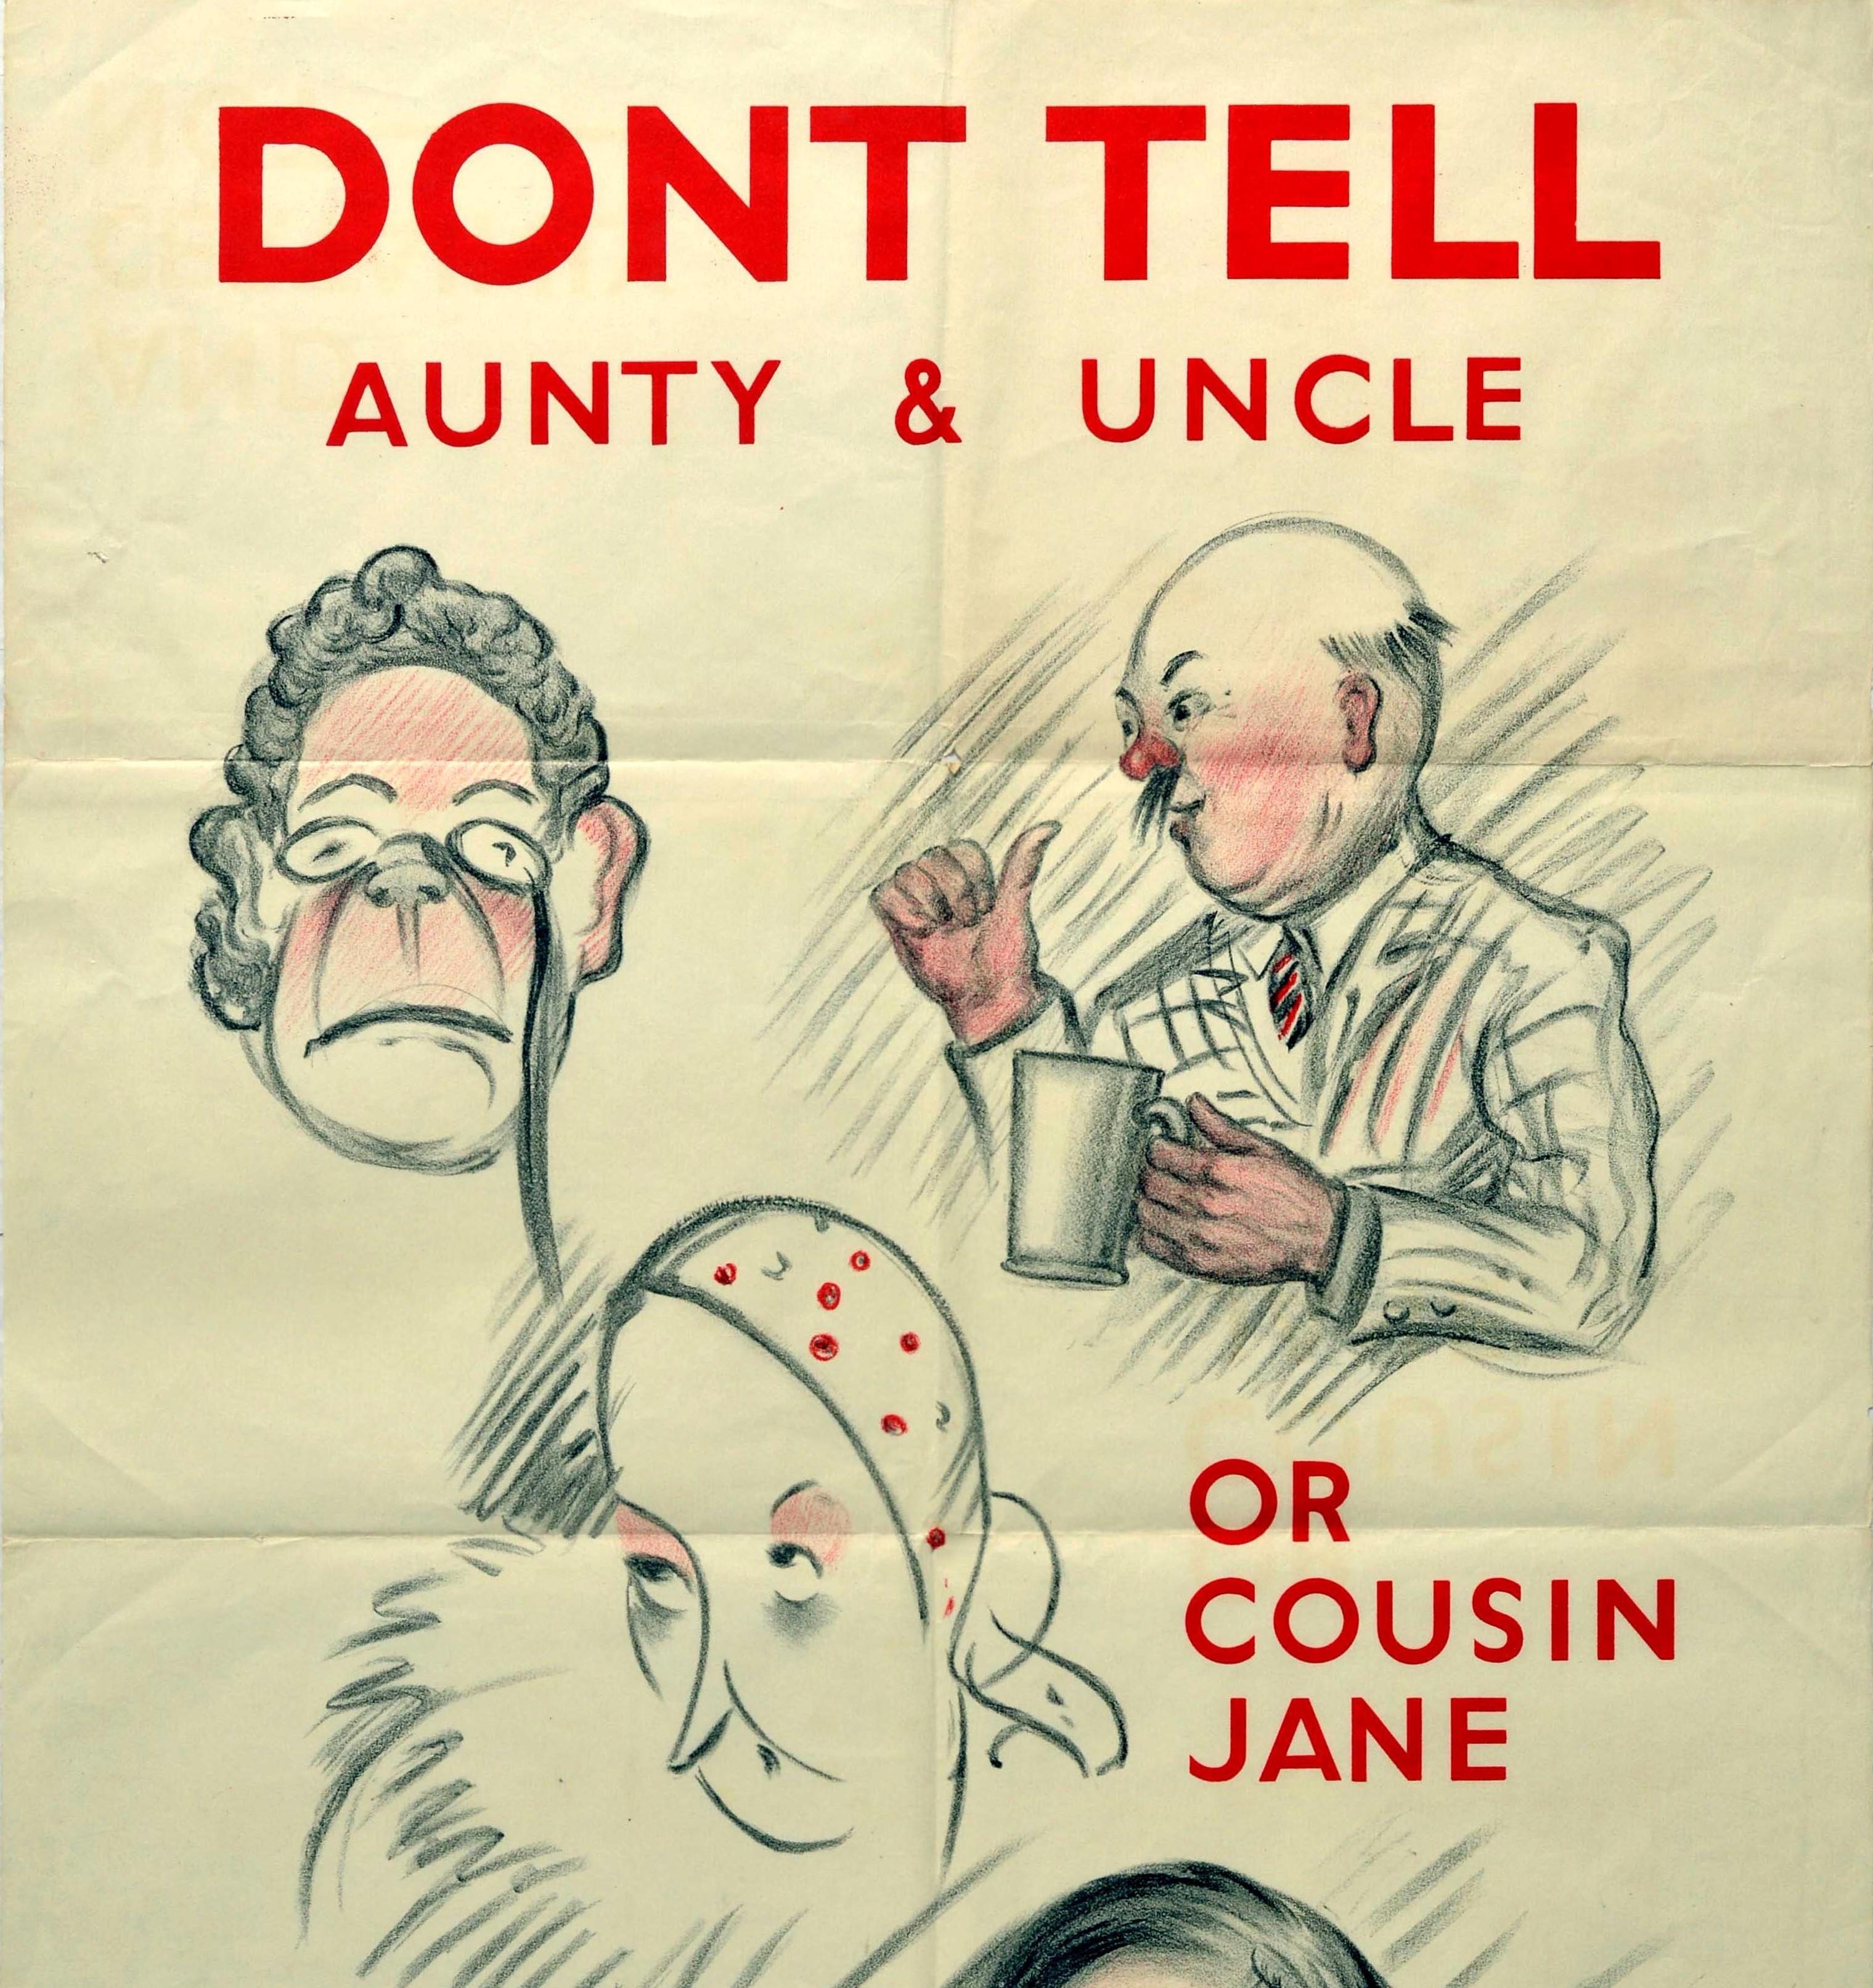 Original vintage World War Two propaganda poster - Dont Tell Aunty & Uncle or Cousin Jane and Certainly not - featuring the bold red lettering between caricature images of a couple depicting the lady wearing glasses and man in a suit holding a drink